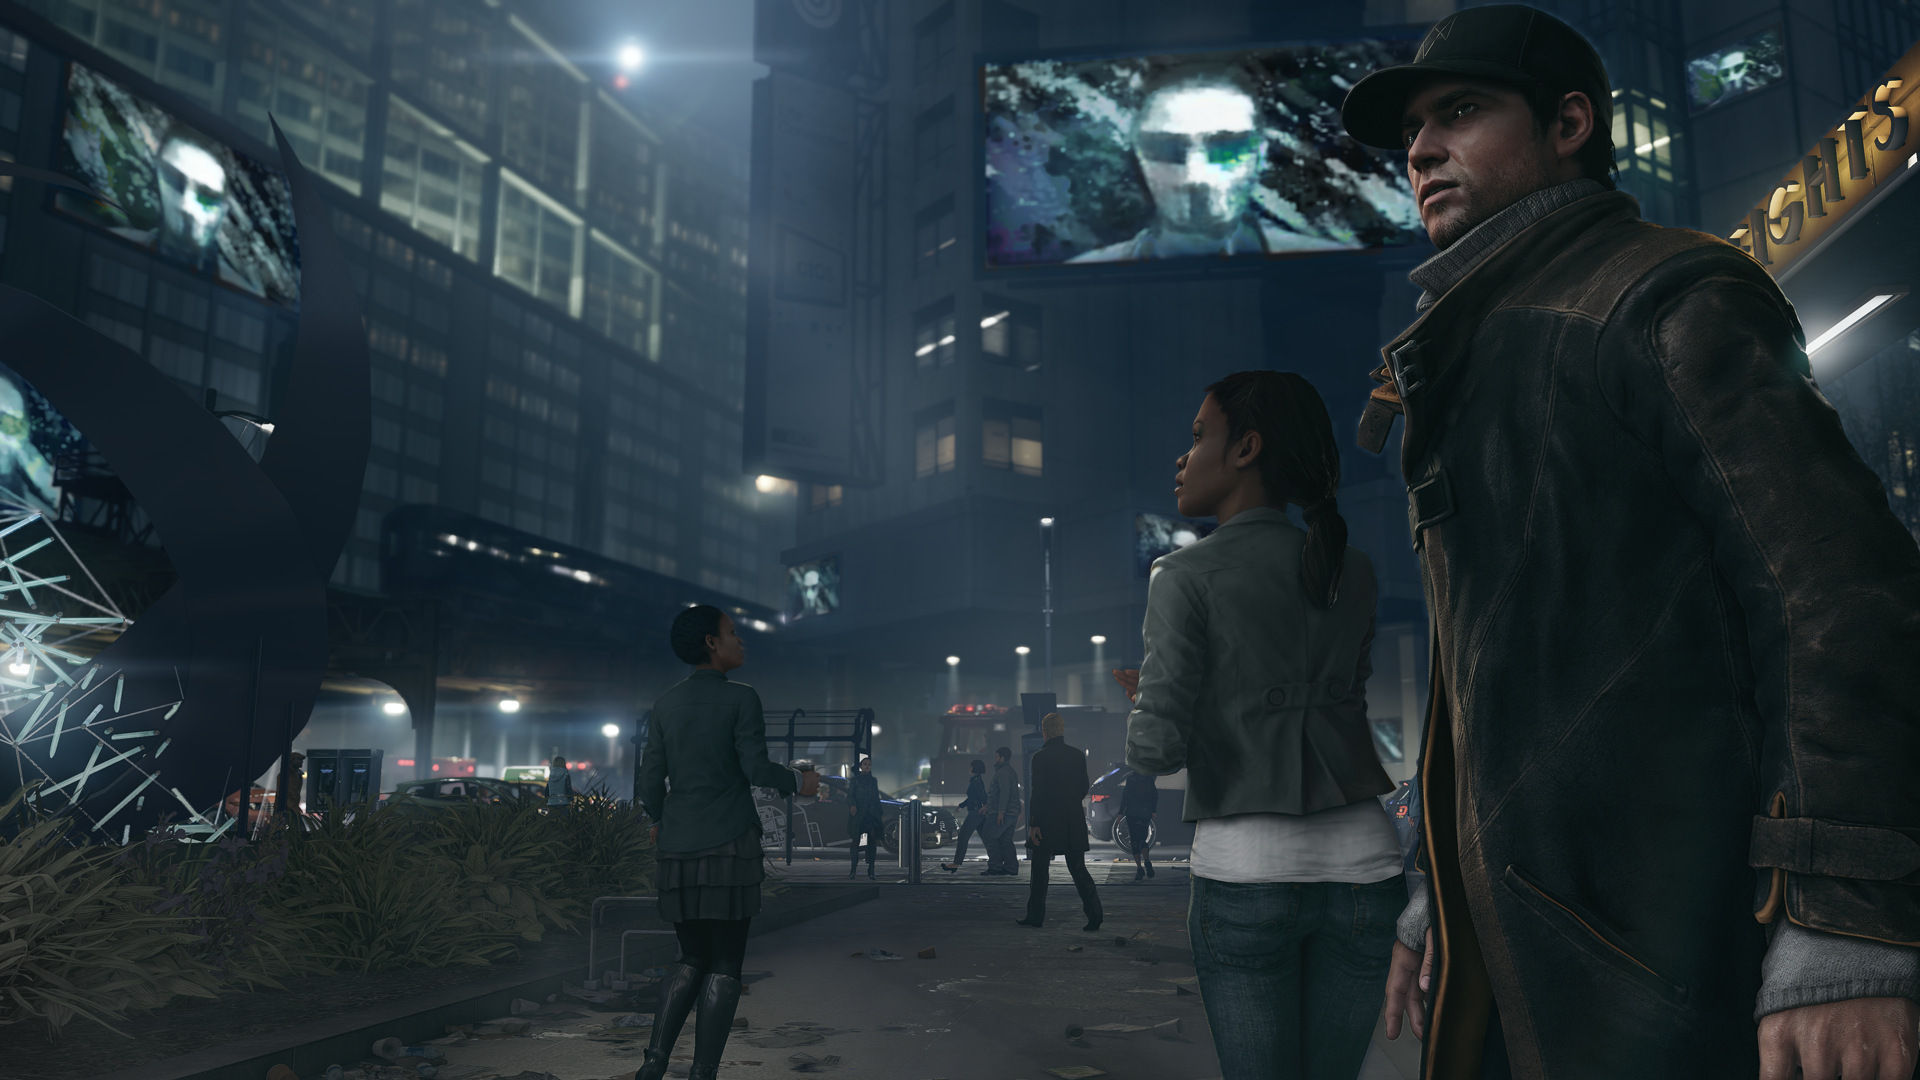 watch dogs review image 1